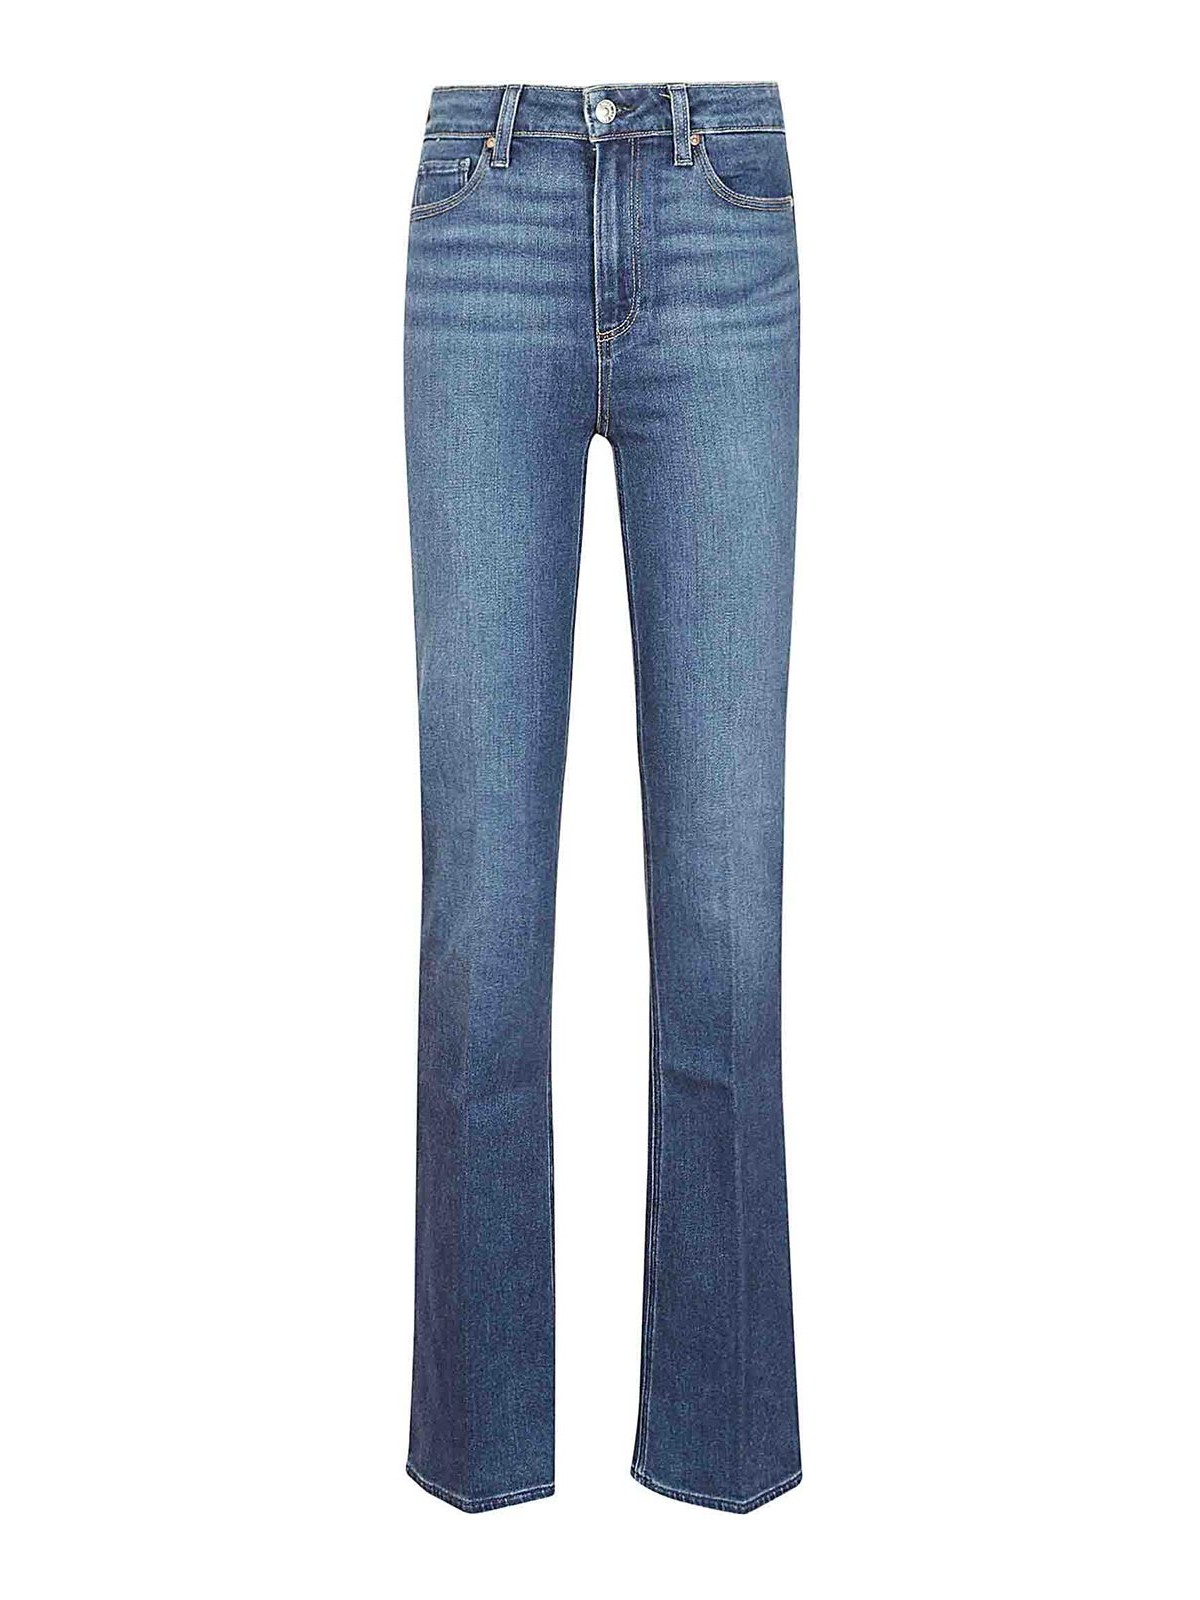 Paige Sasha Extended Coin Pockets Jeans In Blue